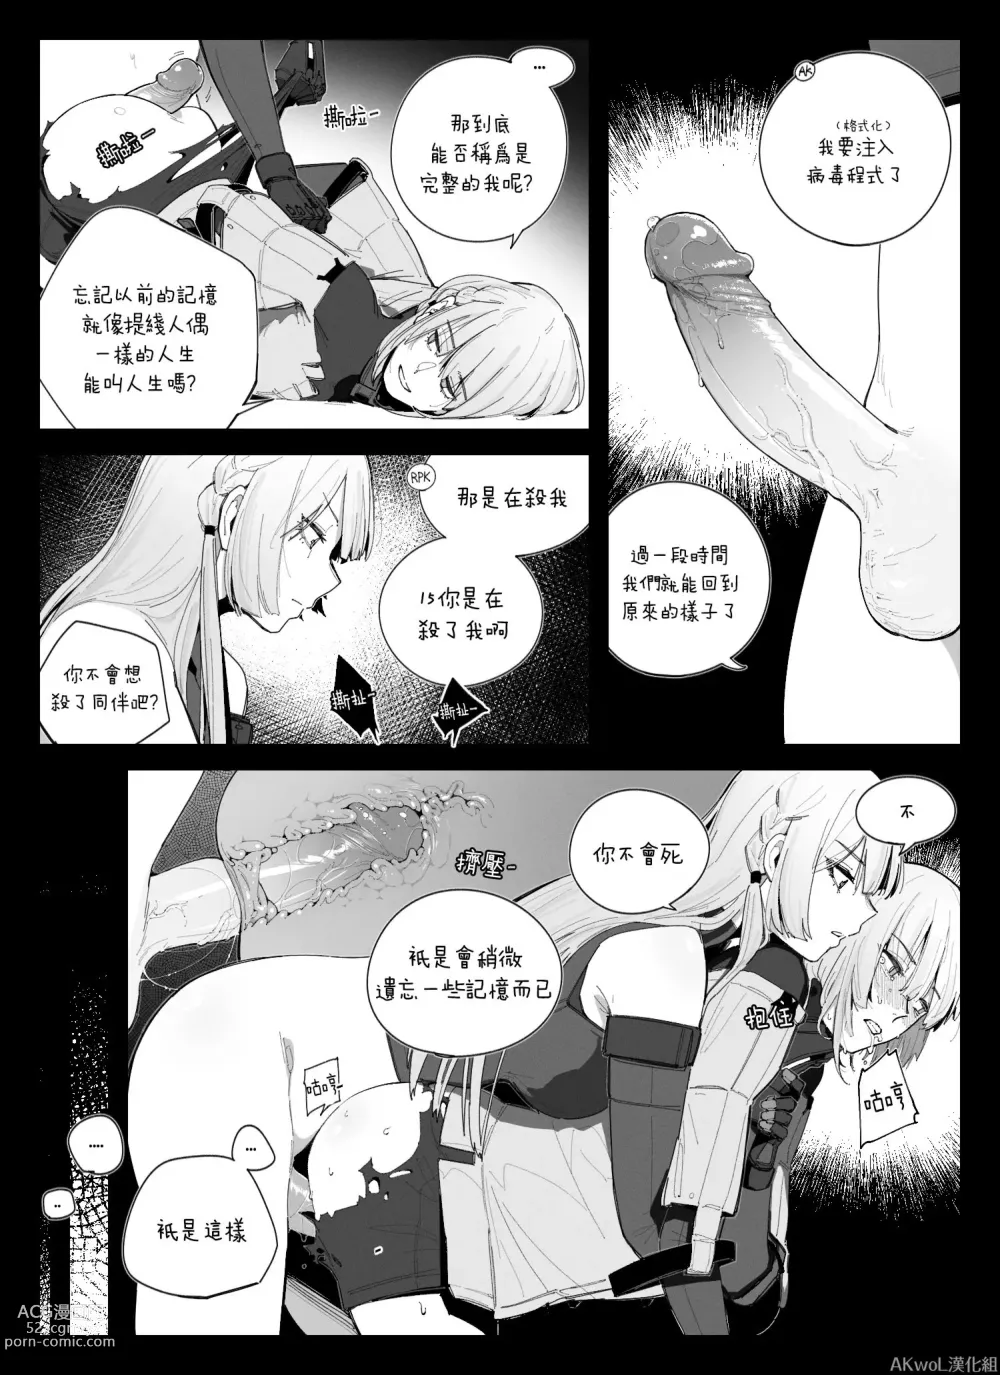 Page 2 of doujinshi RPK-16 wants to be a human (decensored)